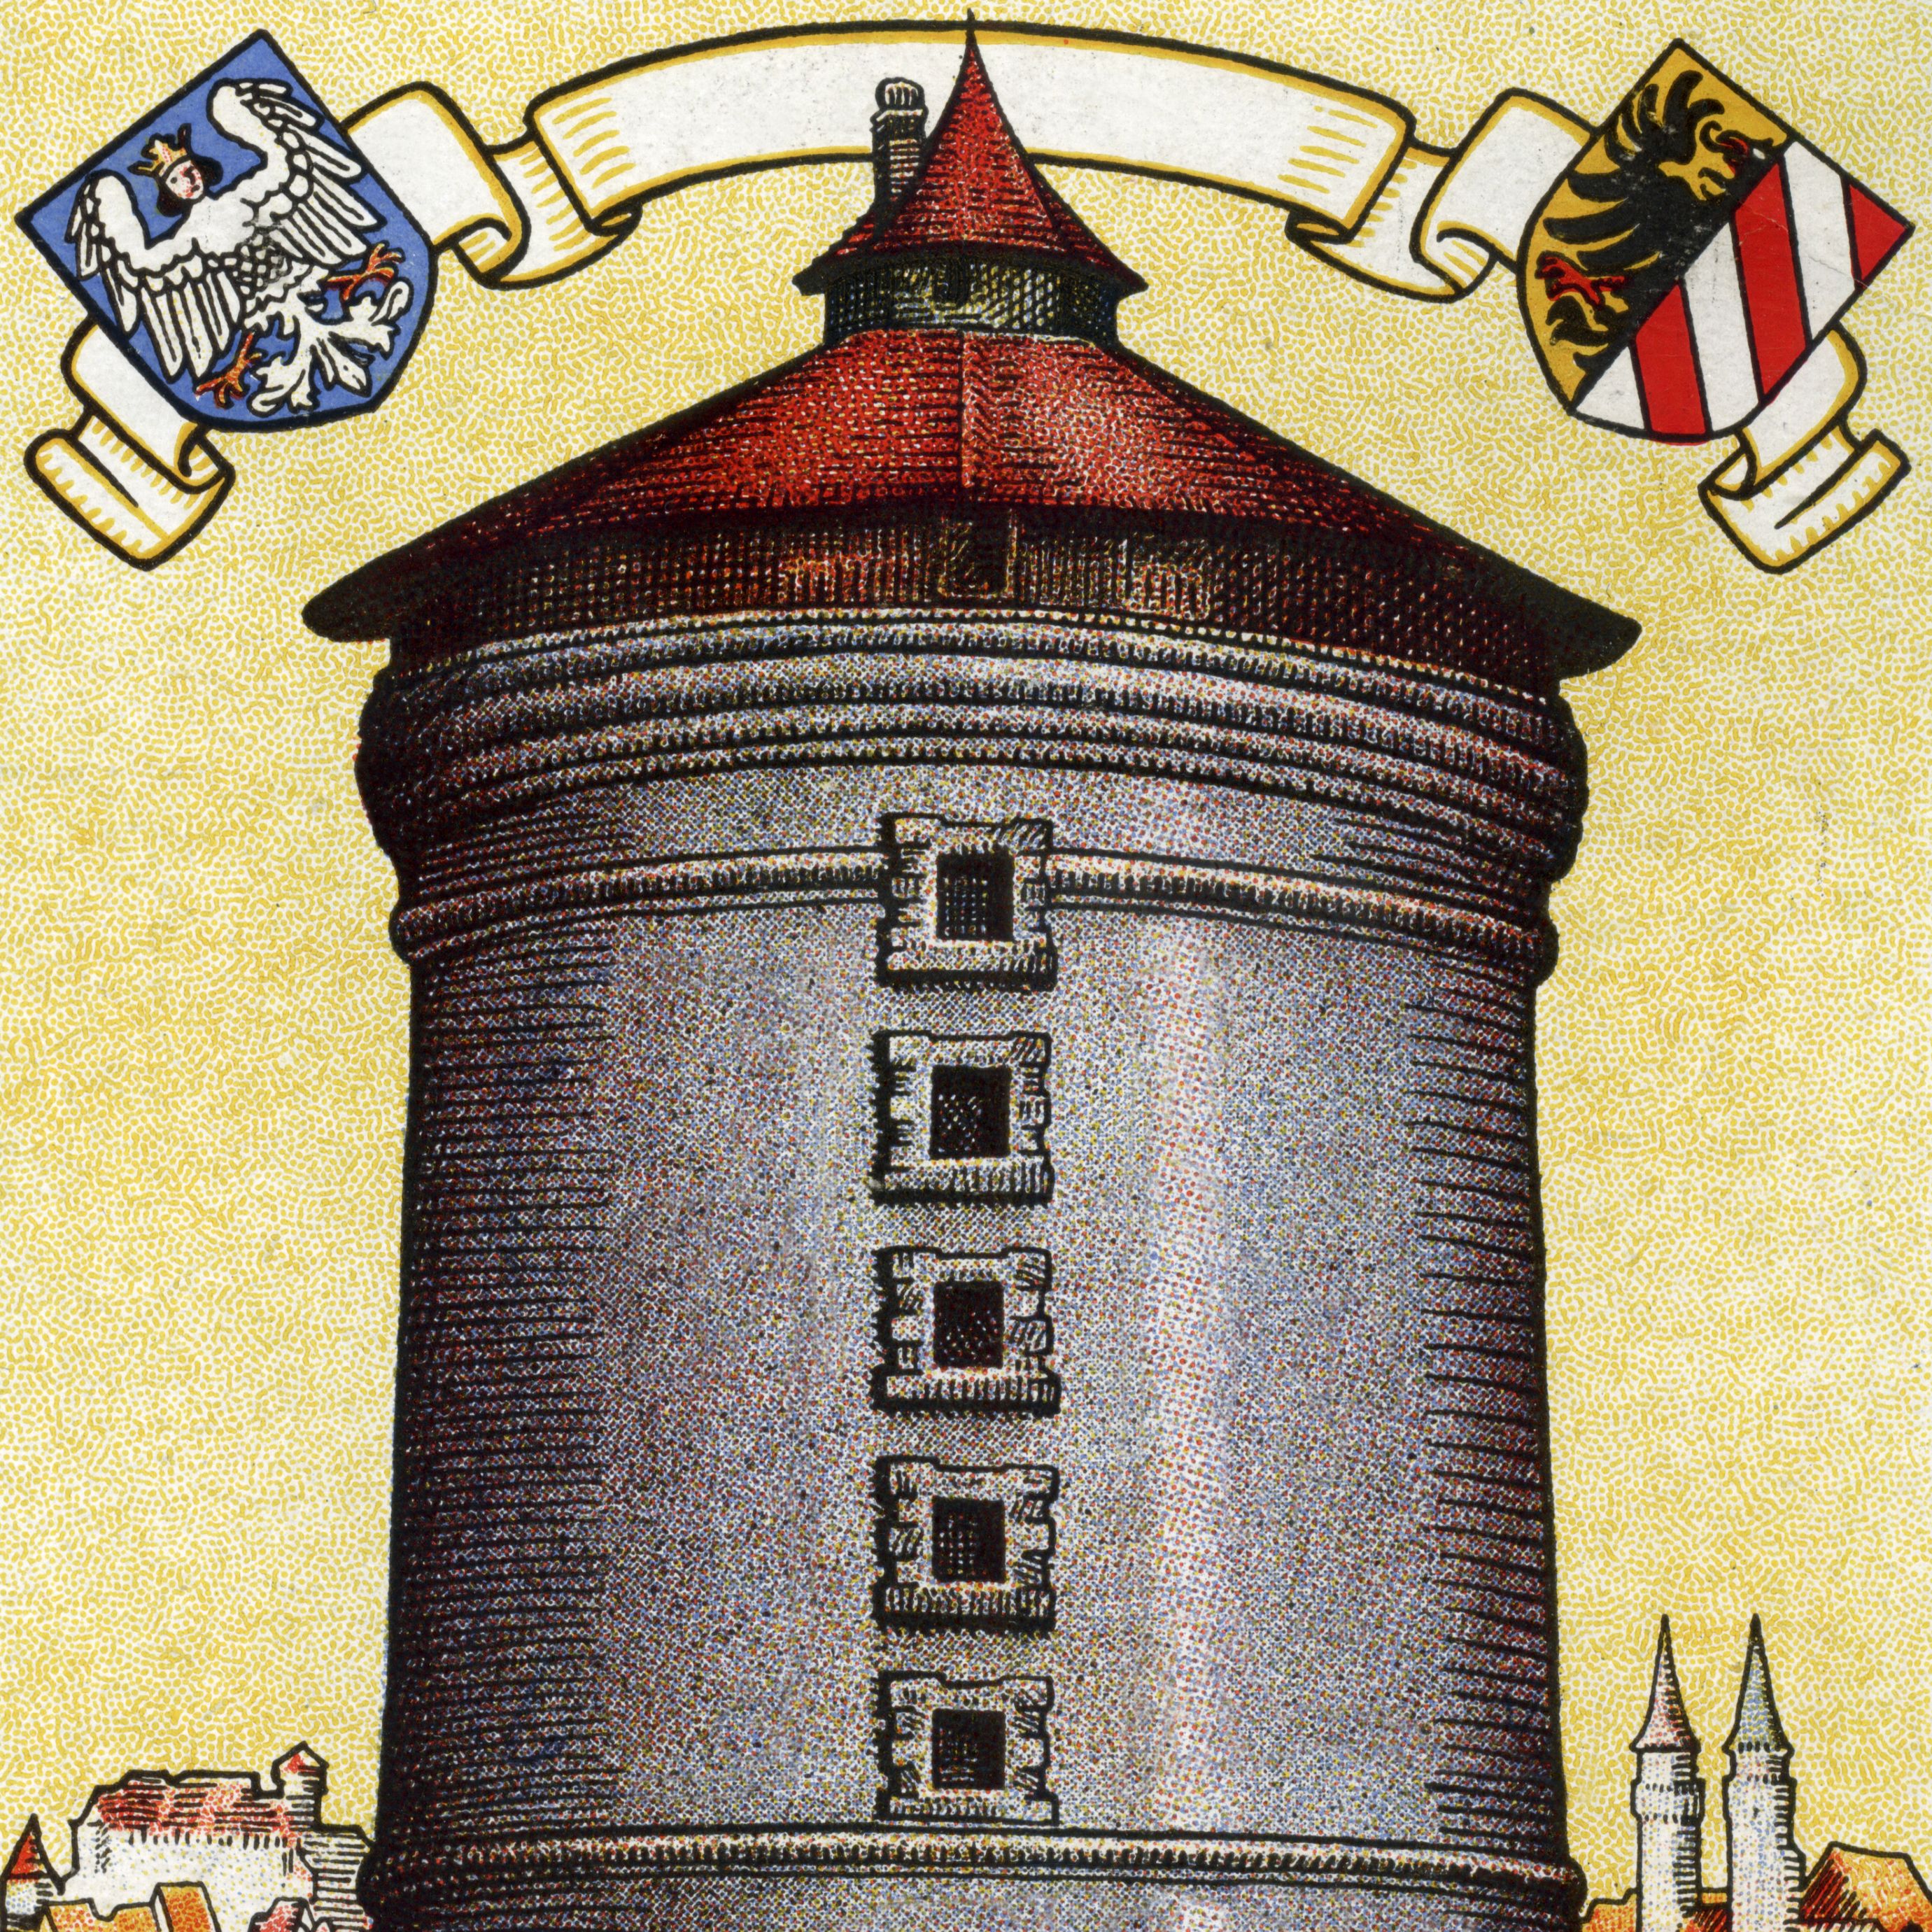 This is how the people trust Nürnberger Sparkasse Tower, above coat of arms of the city of Nuremberg; left Large city coat of arms: Virgin eagle / right Small coat of arms: Imperial eagle with white and red slanted shield.